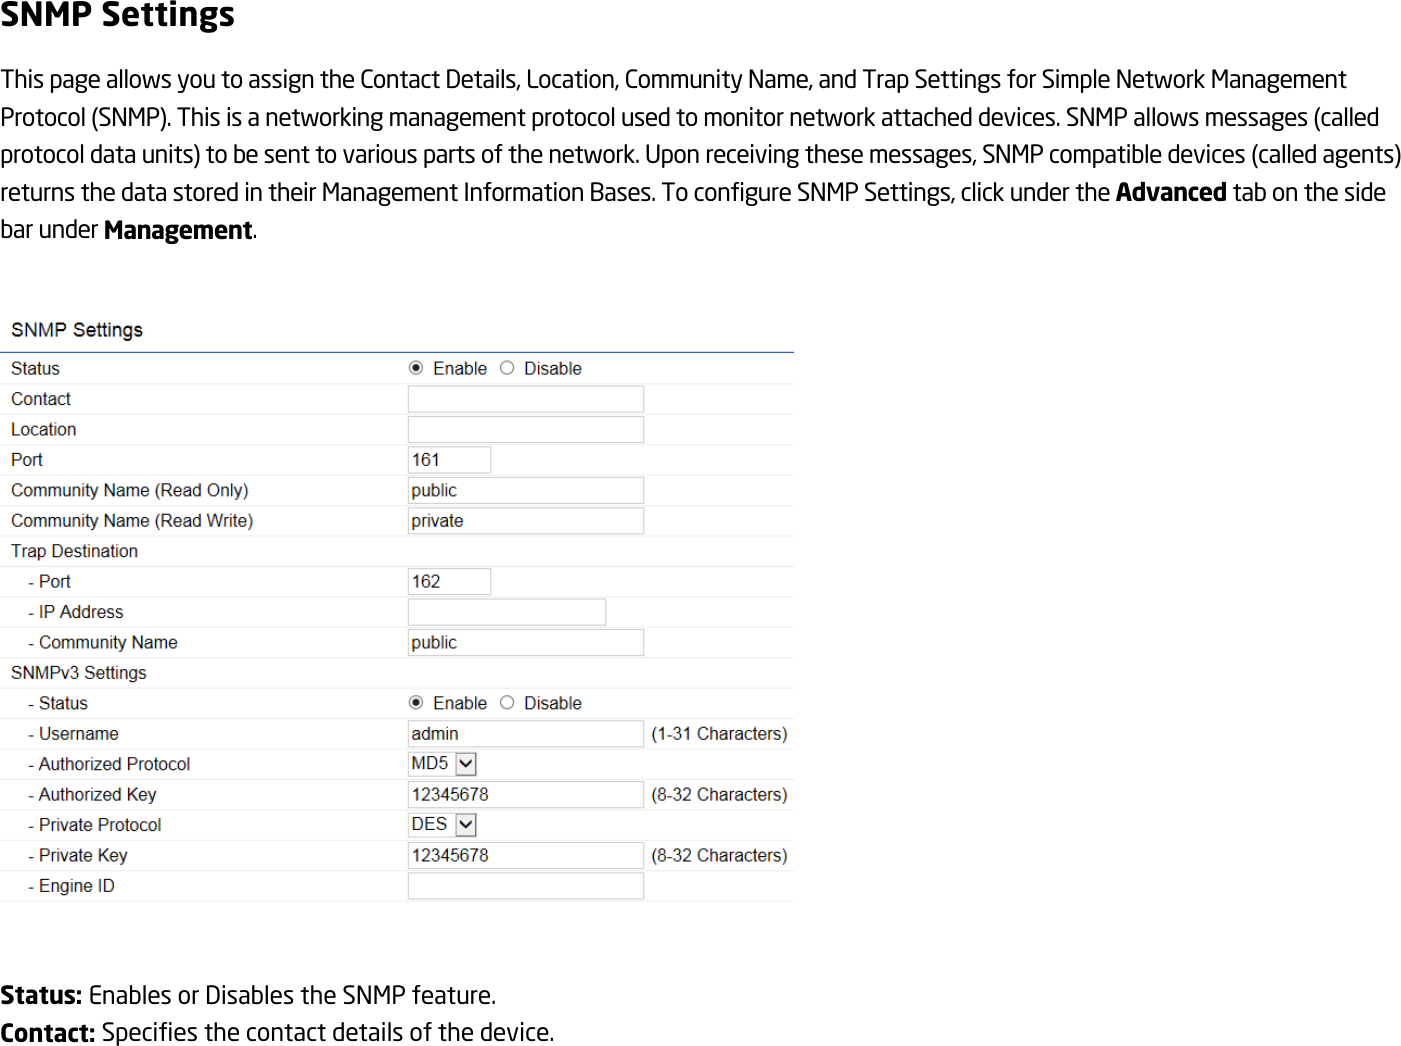 SNMP Settings This page allows you to assign the Contact Details, Location, Community Name, and Trap Settings for Simple Network Management Protocol (SNMP). This is a networking management protocol used to monitor network attached devices. SNMP allows messages (called protocol data units) to be sent to various parts of the network. Upon receiving these messages, SNMP compatible devices (called agents) returns the data stored in their Management Information Bases. To configure SNMP Settings, click under the Advanced tab on the side bar under Management.    Status: Enables or Disables the SNMP feature. Contact: Specifies the contact details of the device. 